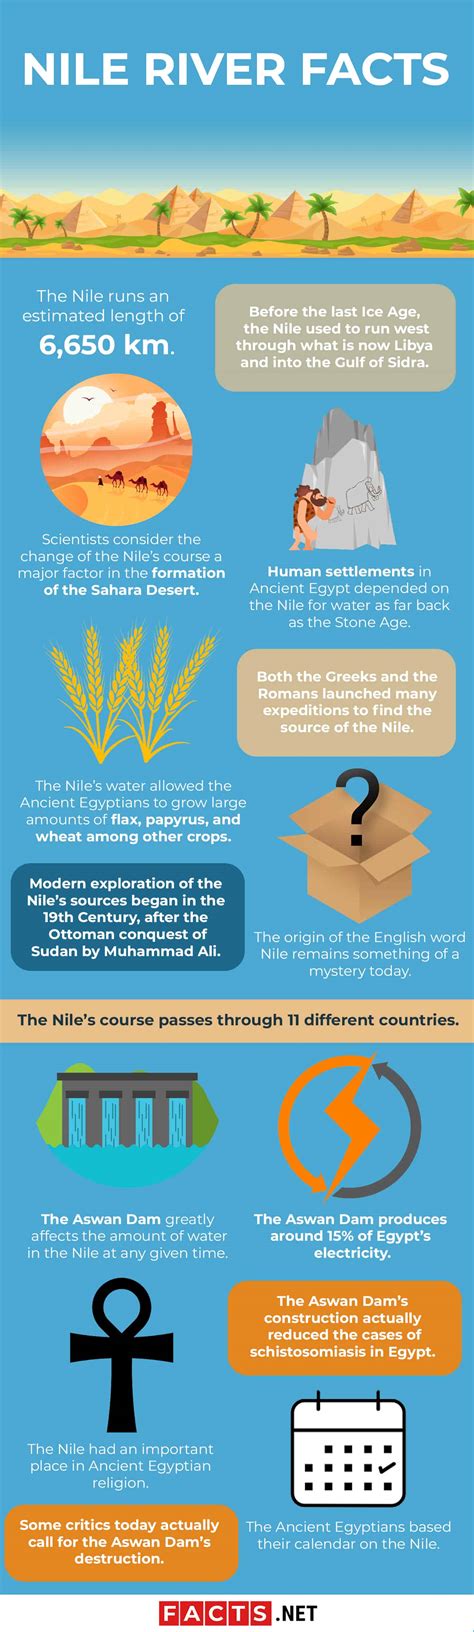 40 nile river facts about the great river of africa